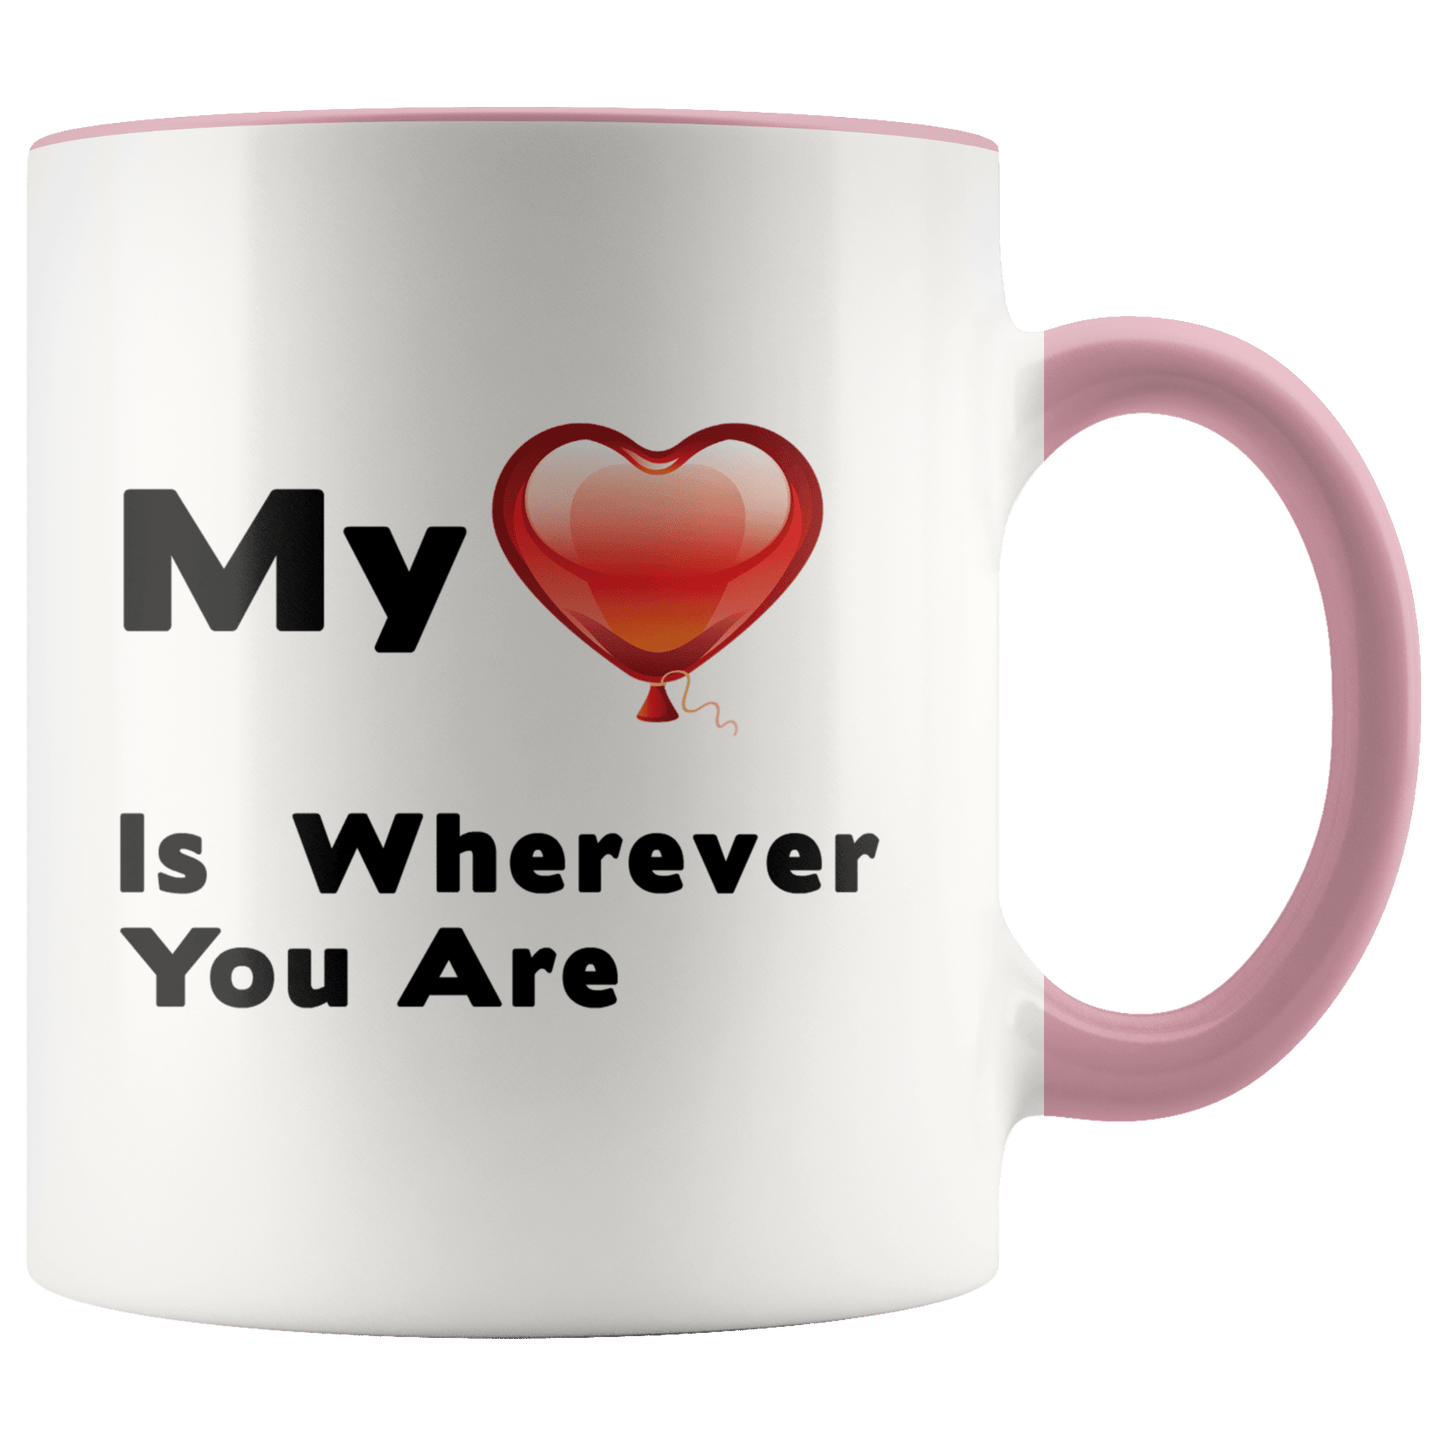 My Heart Is Wherever You Are - 11oz Color Accent Mug - Omtheo Gifts